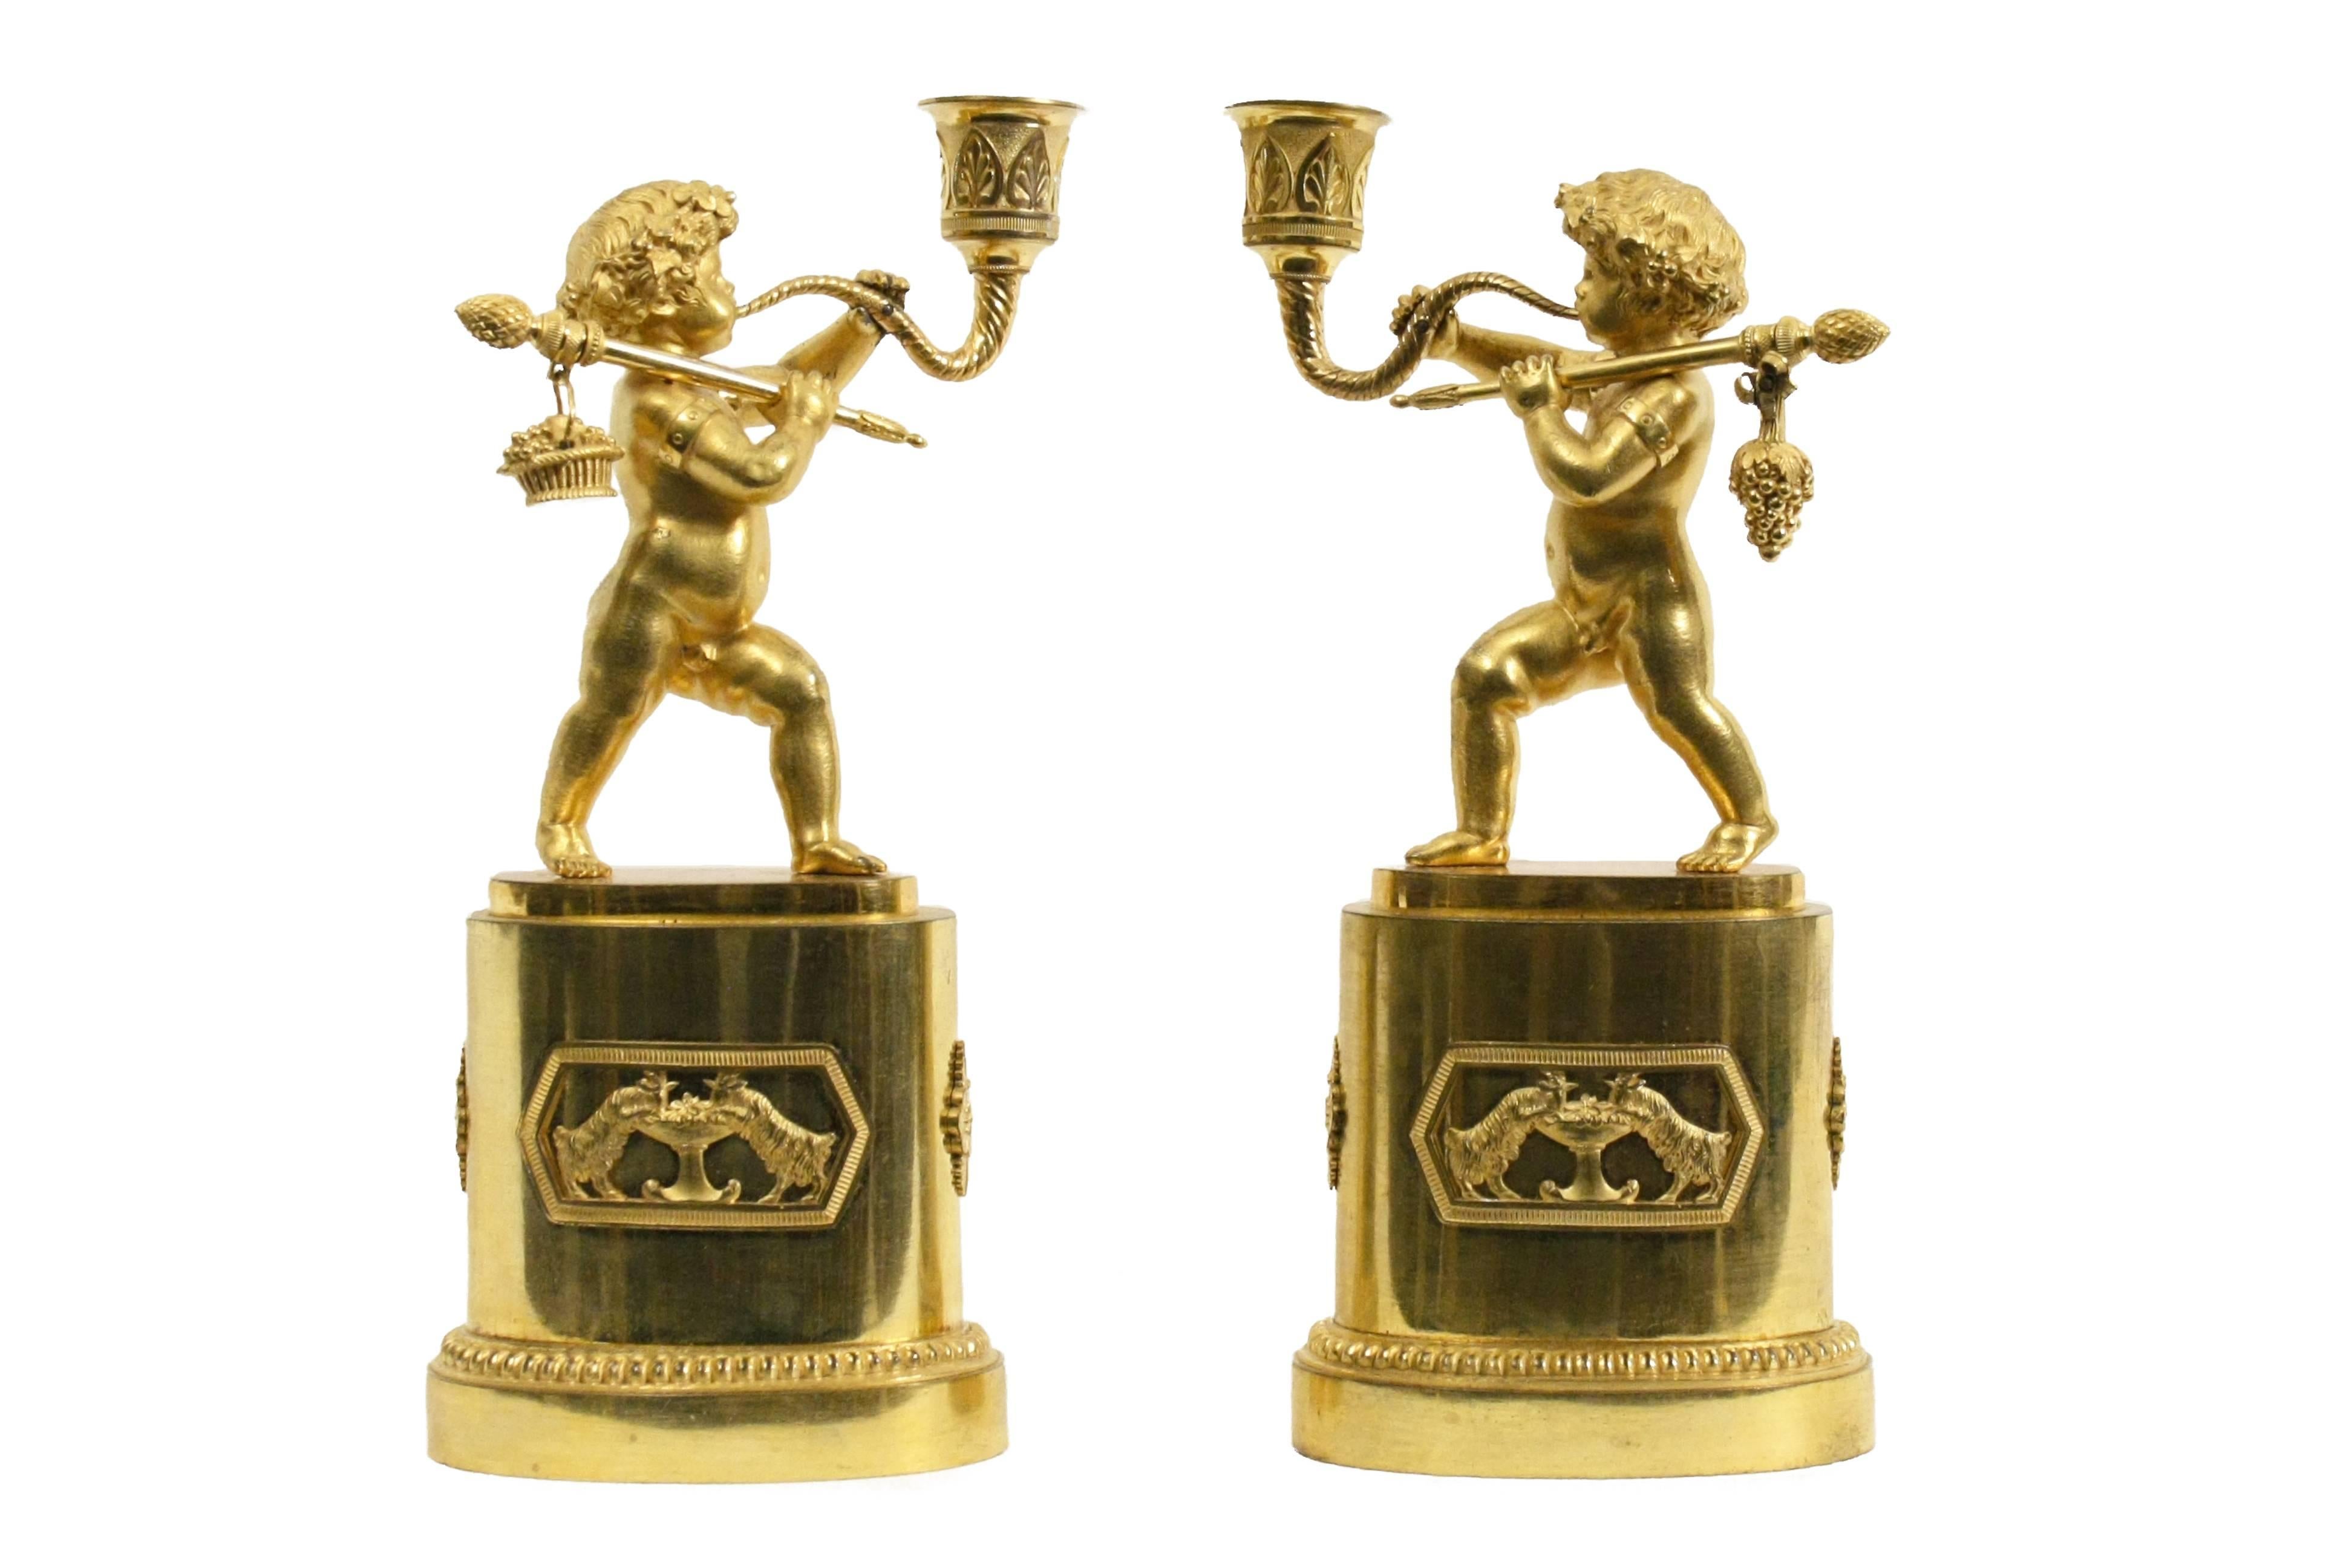 Pair of candlesticks modeled as standing putti blowing a horn with grapes and fruit base hanging over their shoulders, after Claude Galle.

Measures: H 11-1/4 in, W 6-1/2 in.